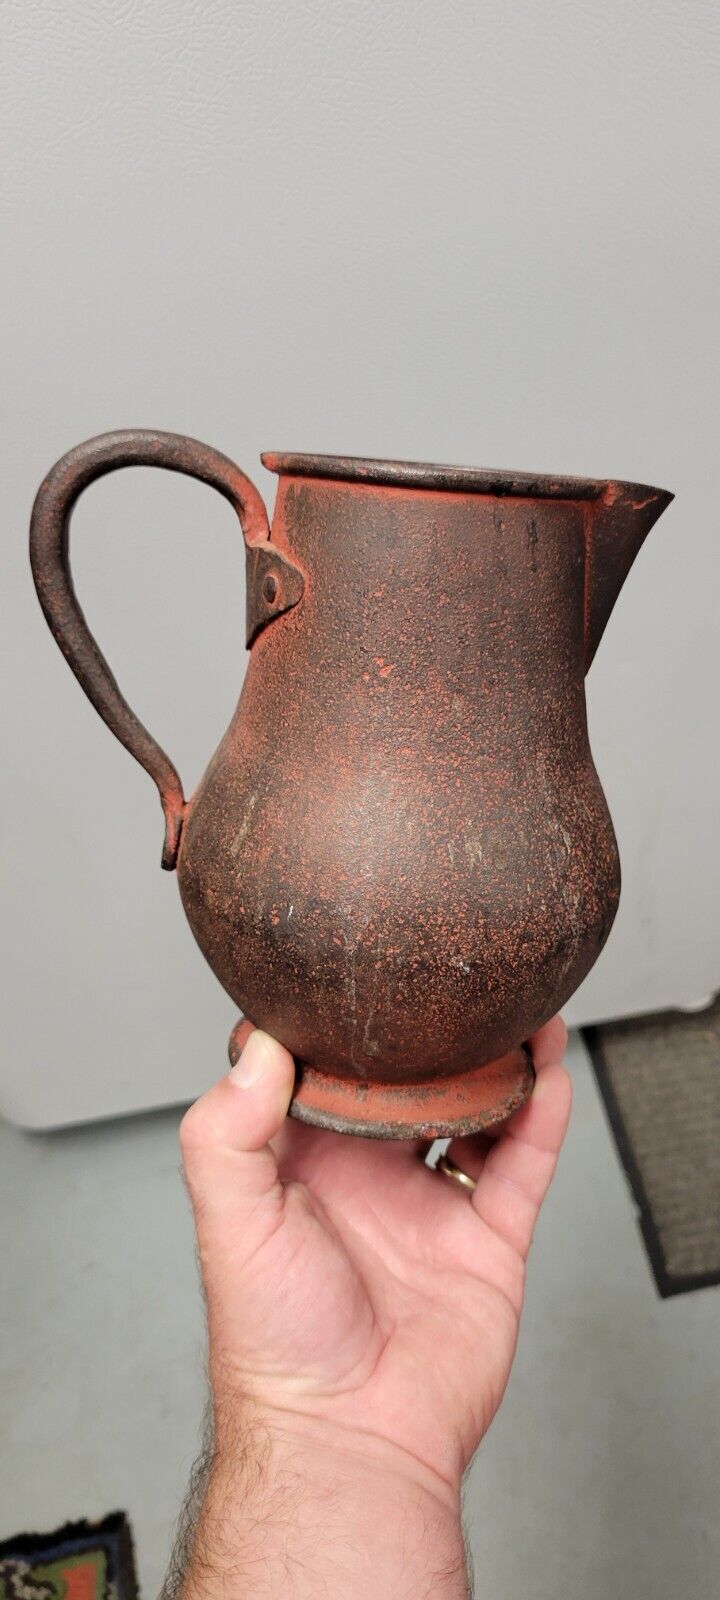 Scarce Rare Primitive Antique Early American Cast Iron Pouring Pitcher Colonial